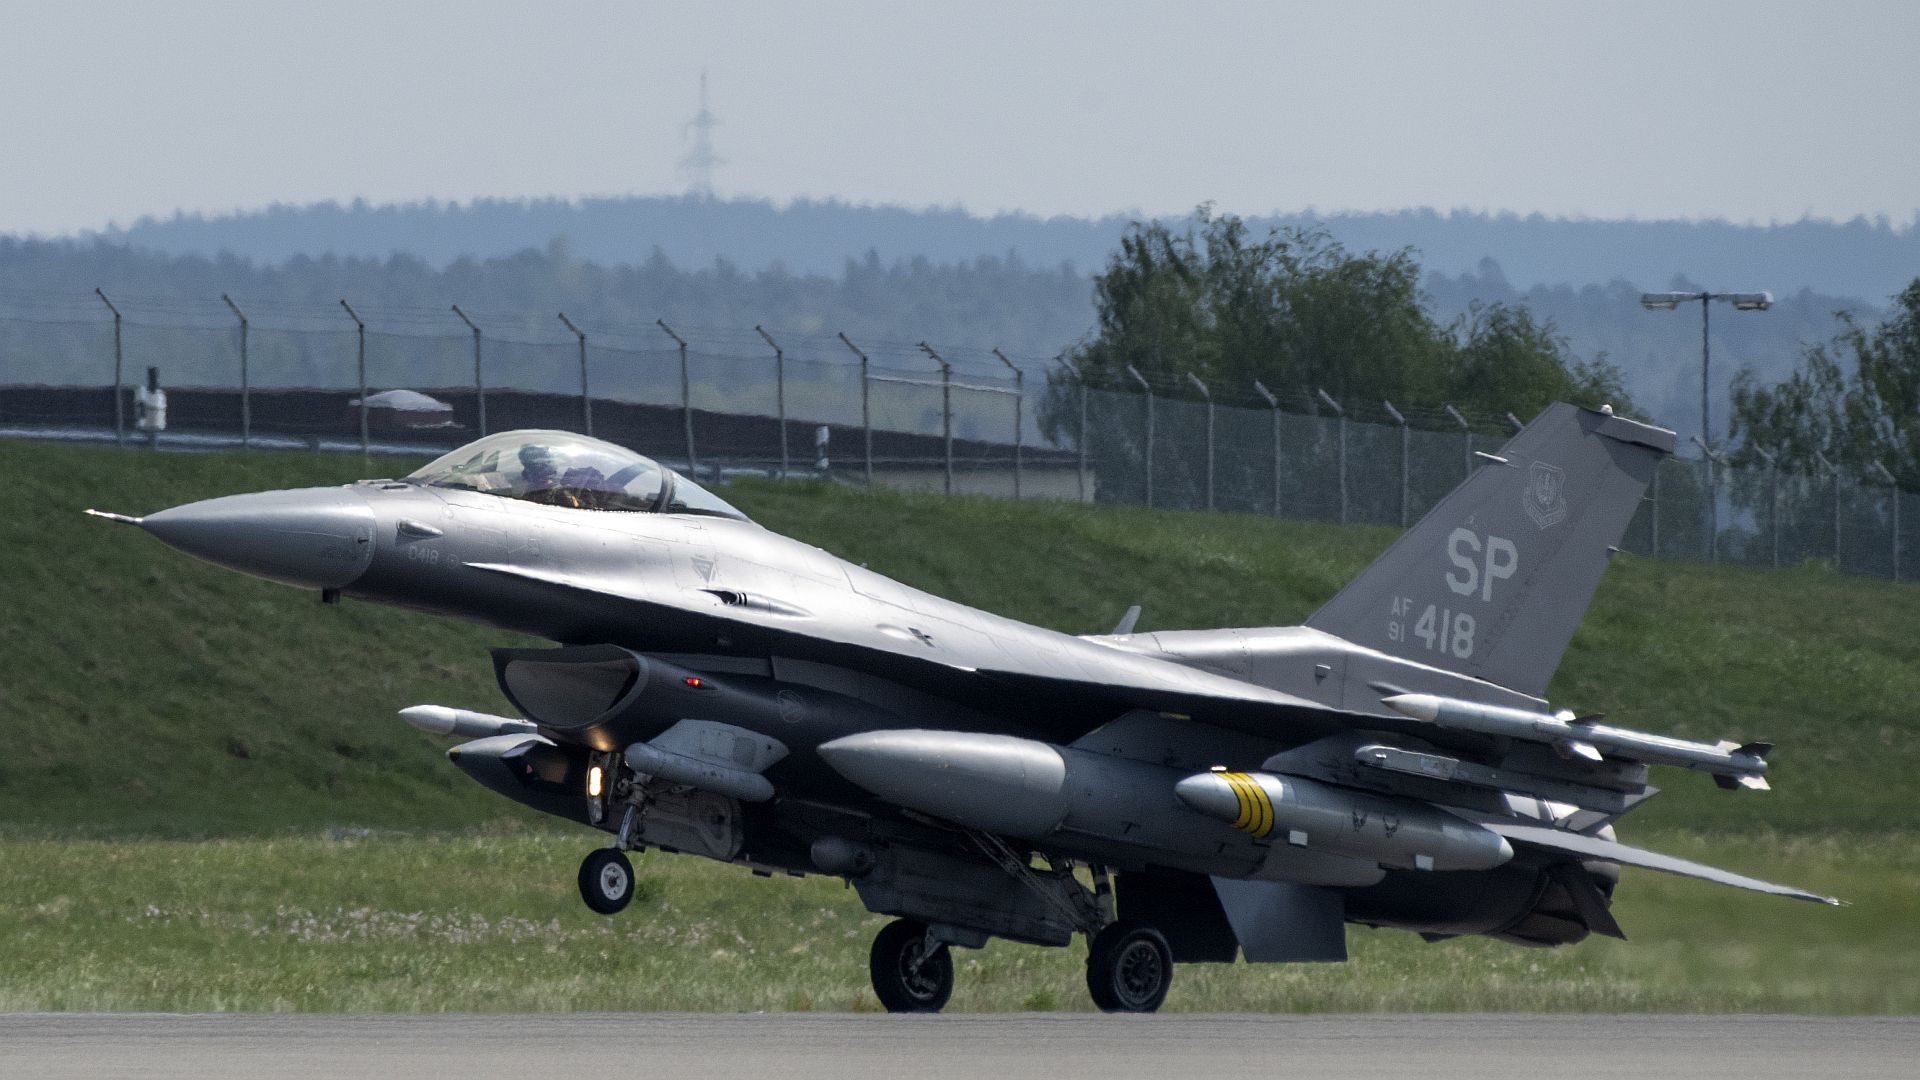 16 Fighting Falcon Aircraft Assigned To The 480th Fighter Squadron Lands At Spangdahlem Air Base Germany April 30 2022